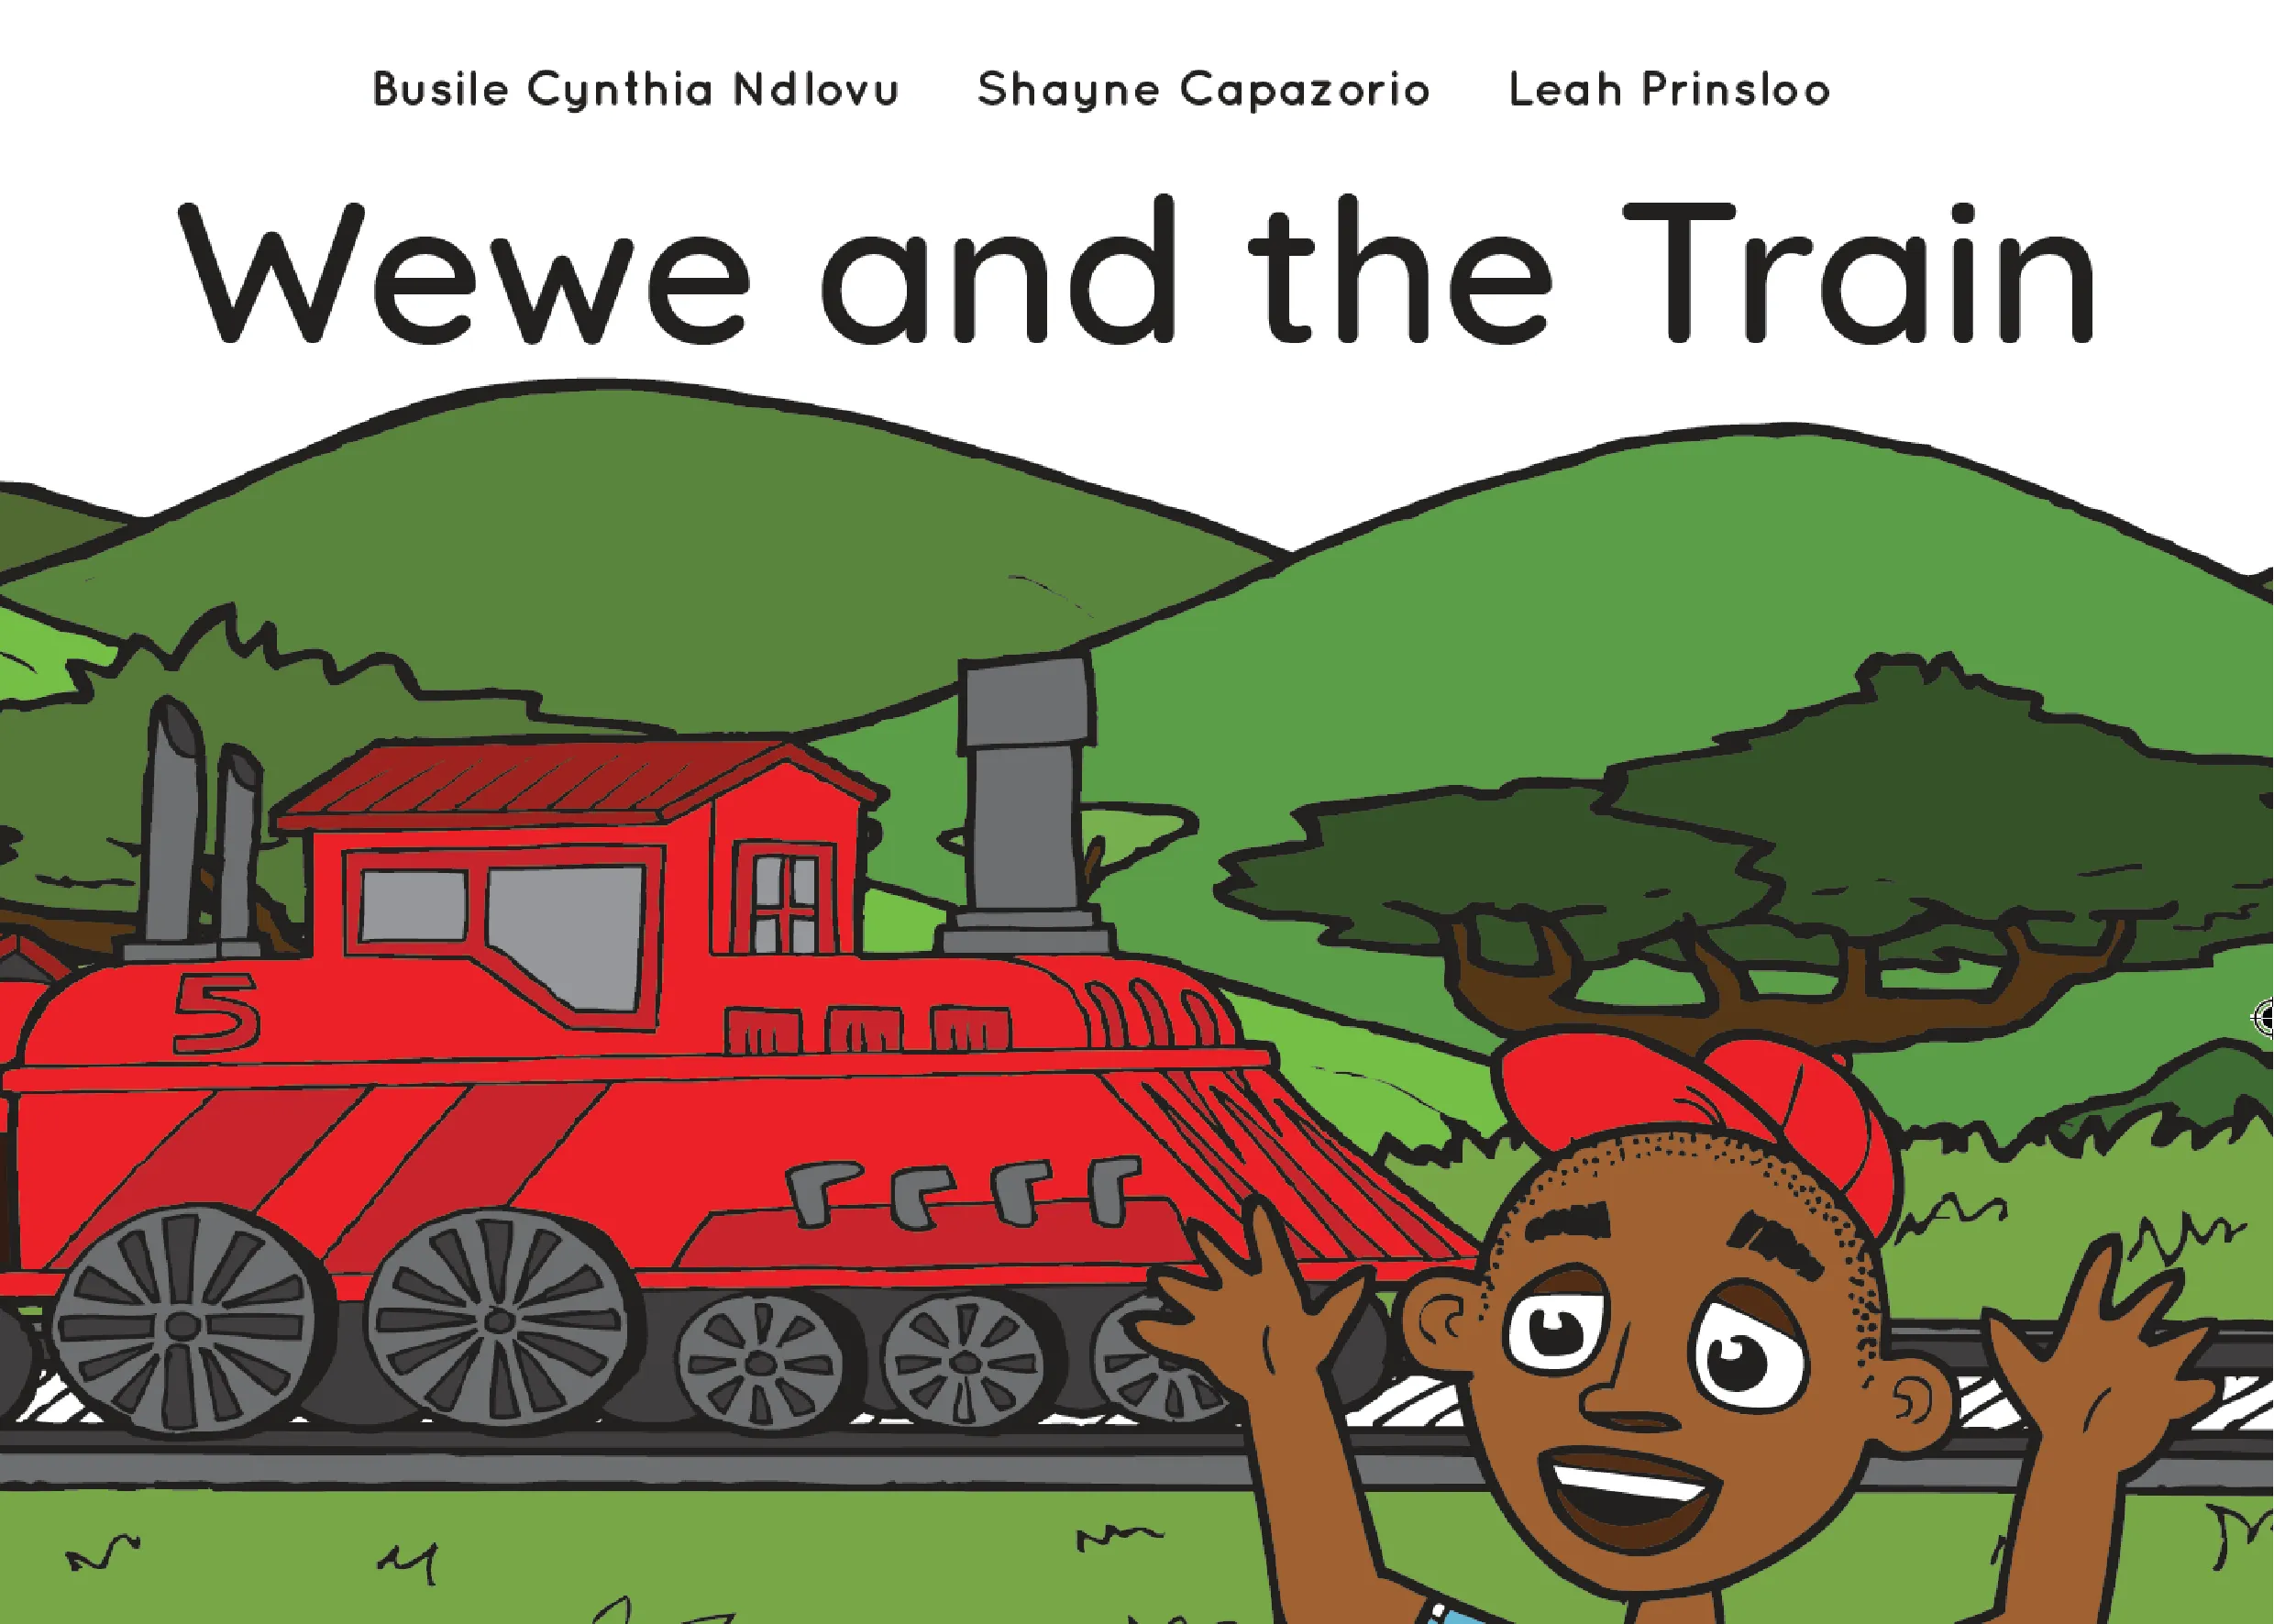 Wewe and the Train